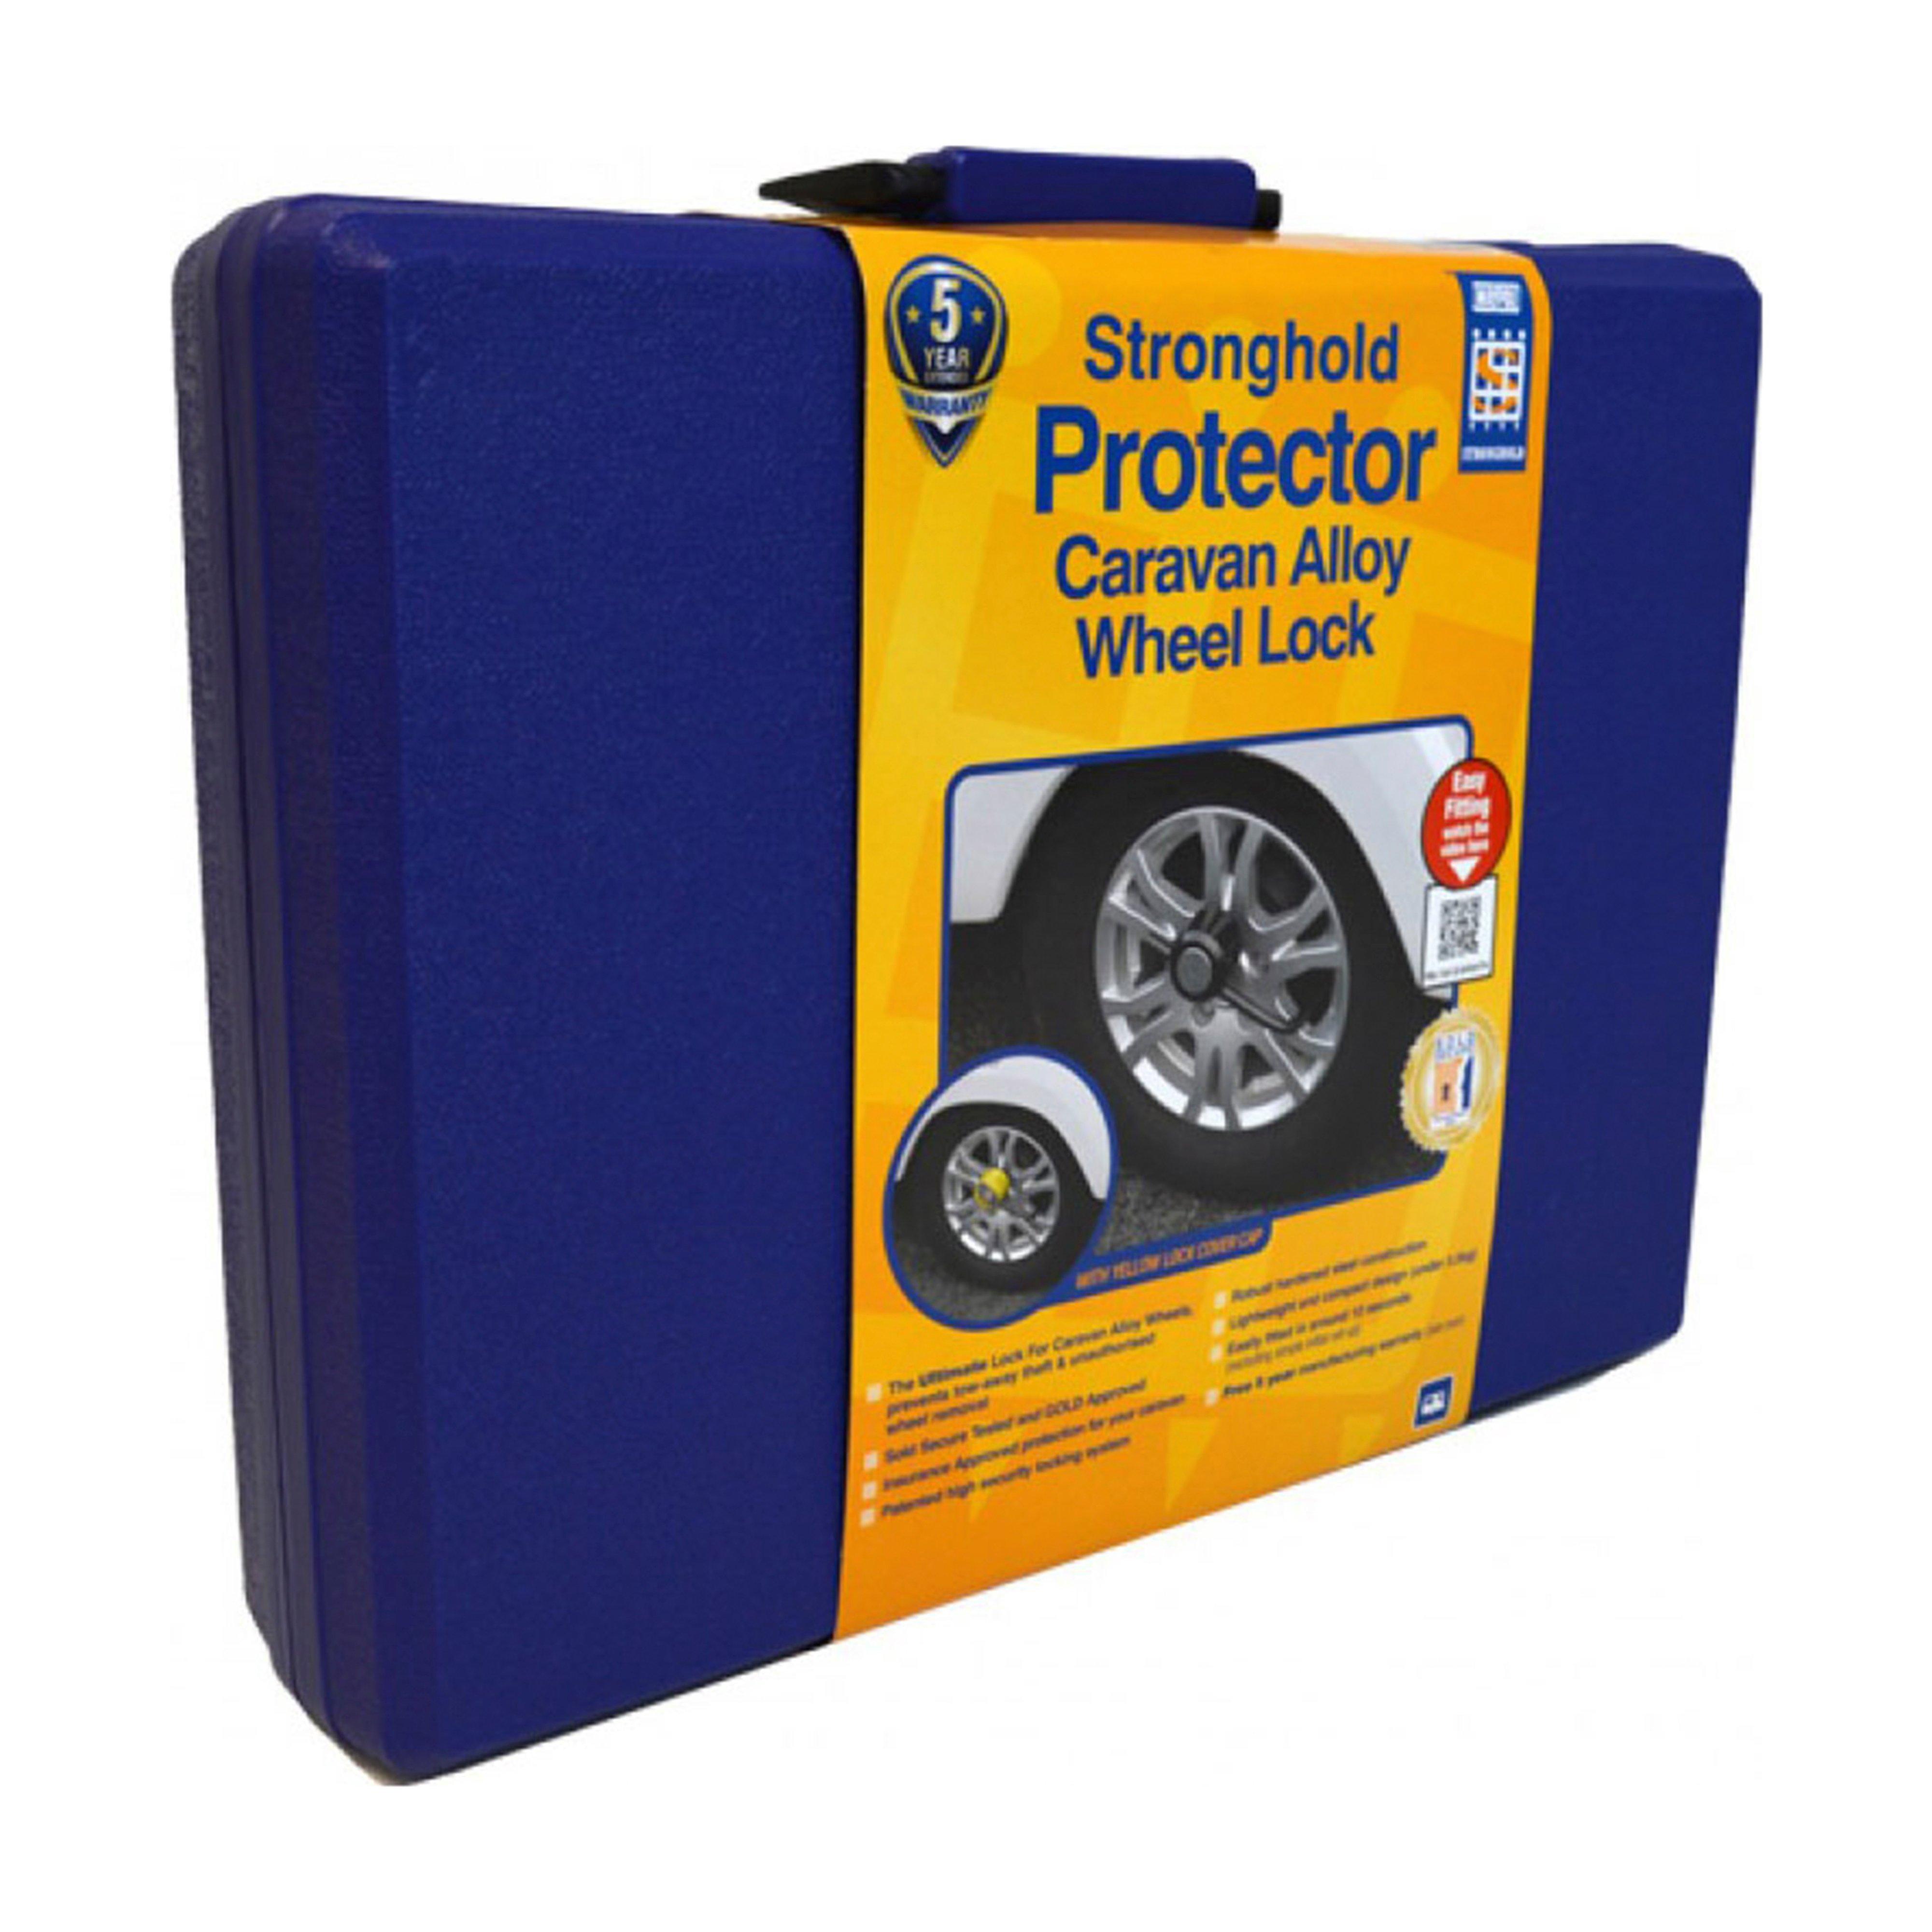 Stronghold Protector Caravan Alloy Wheel Lock Review